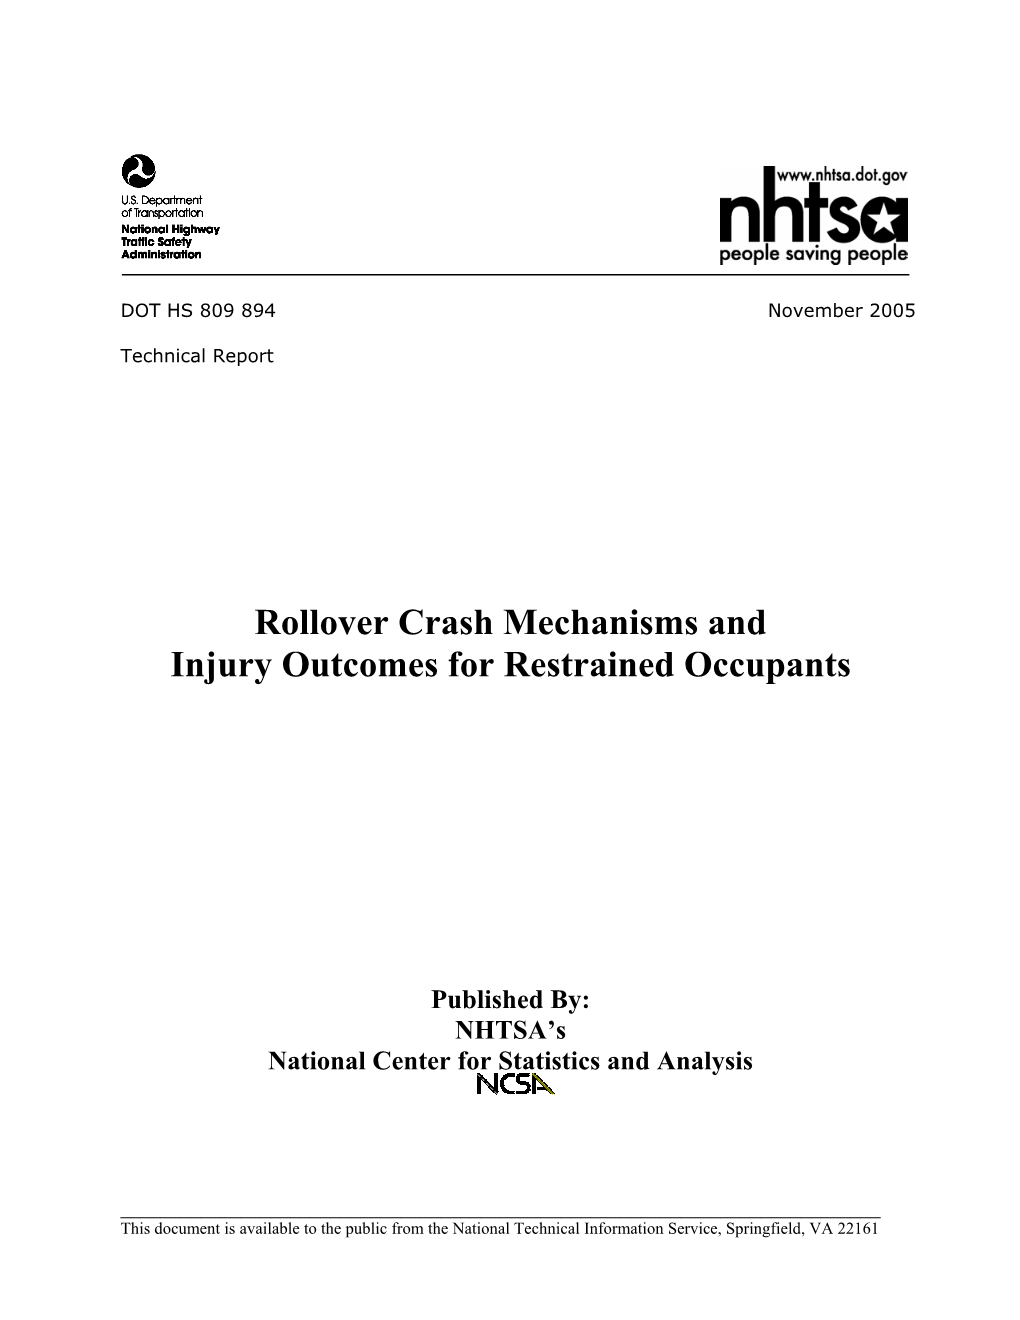 Rollover Crash Mechanisms and Injury Outcomes for Restrained Occupants